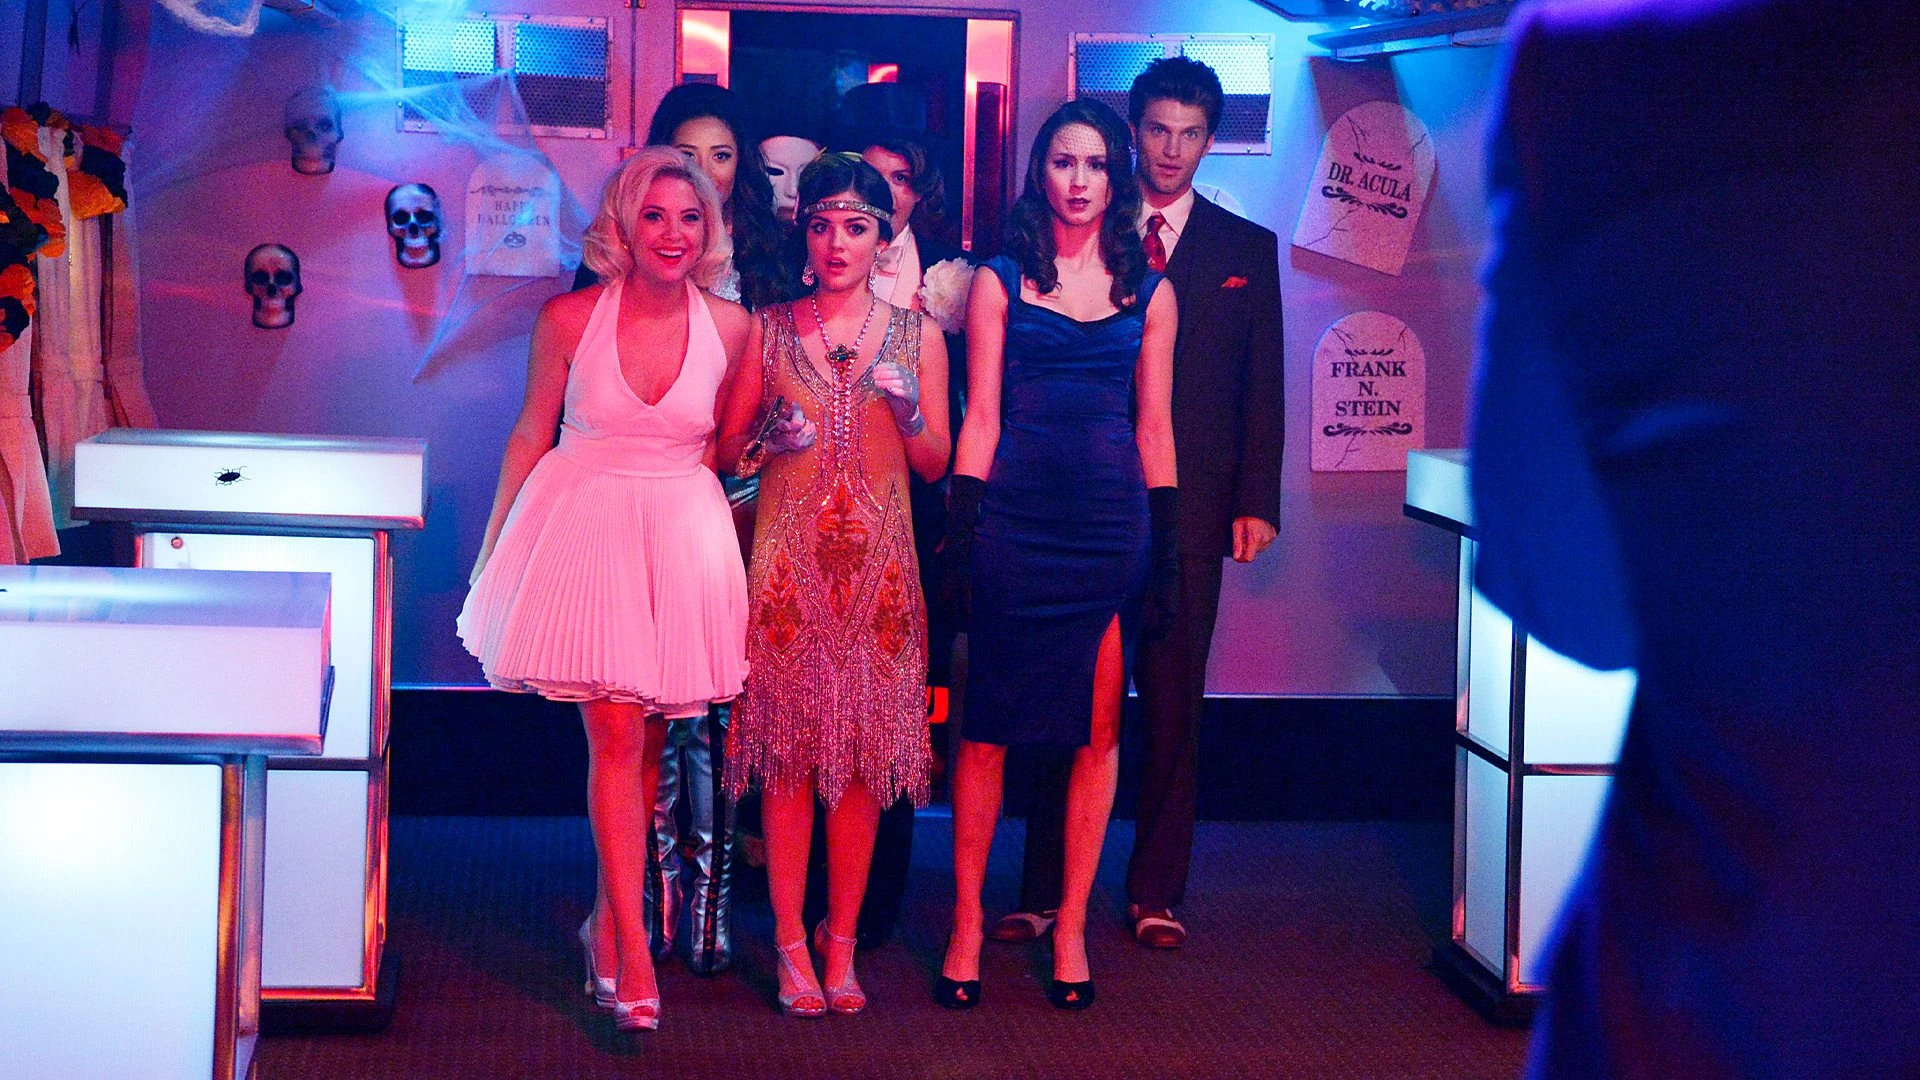 The cast of Pretty Little Liars is walking into a Halloween party.